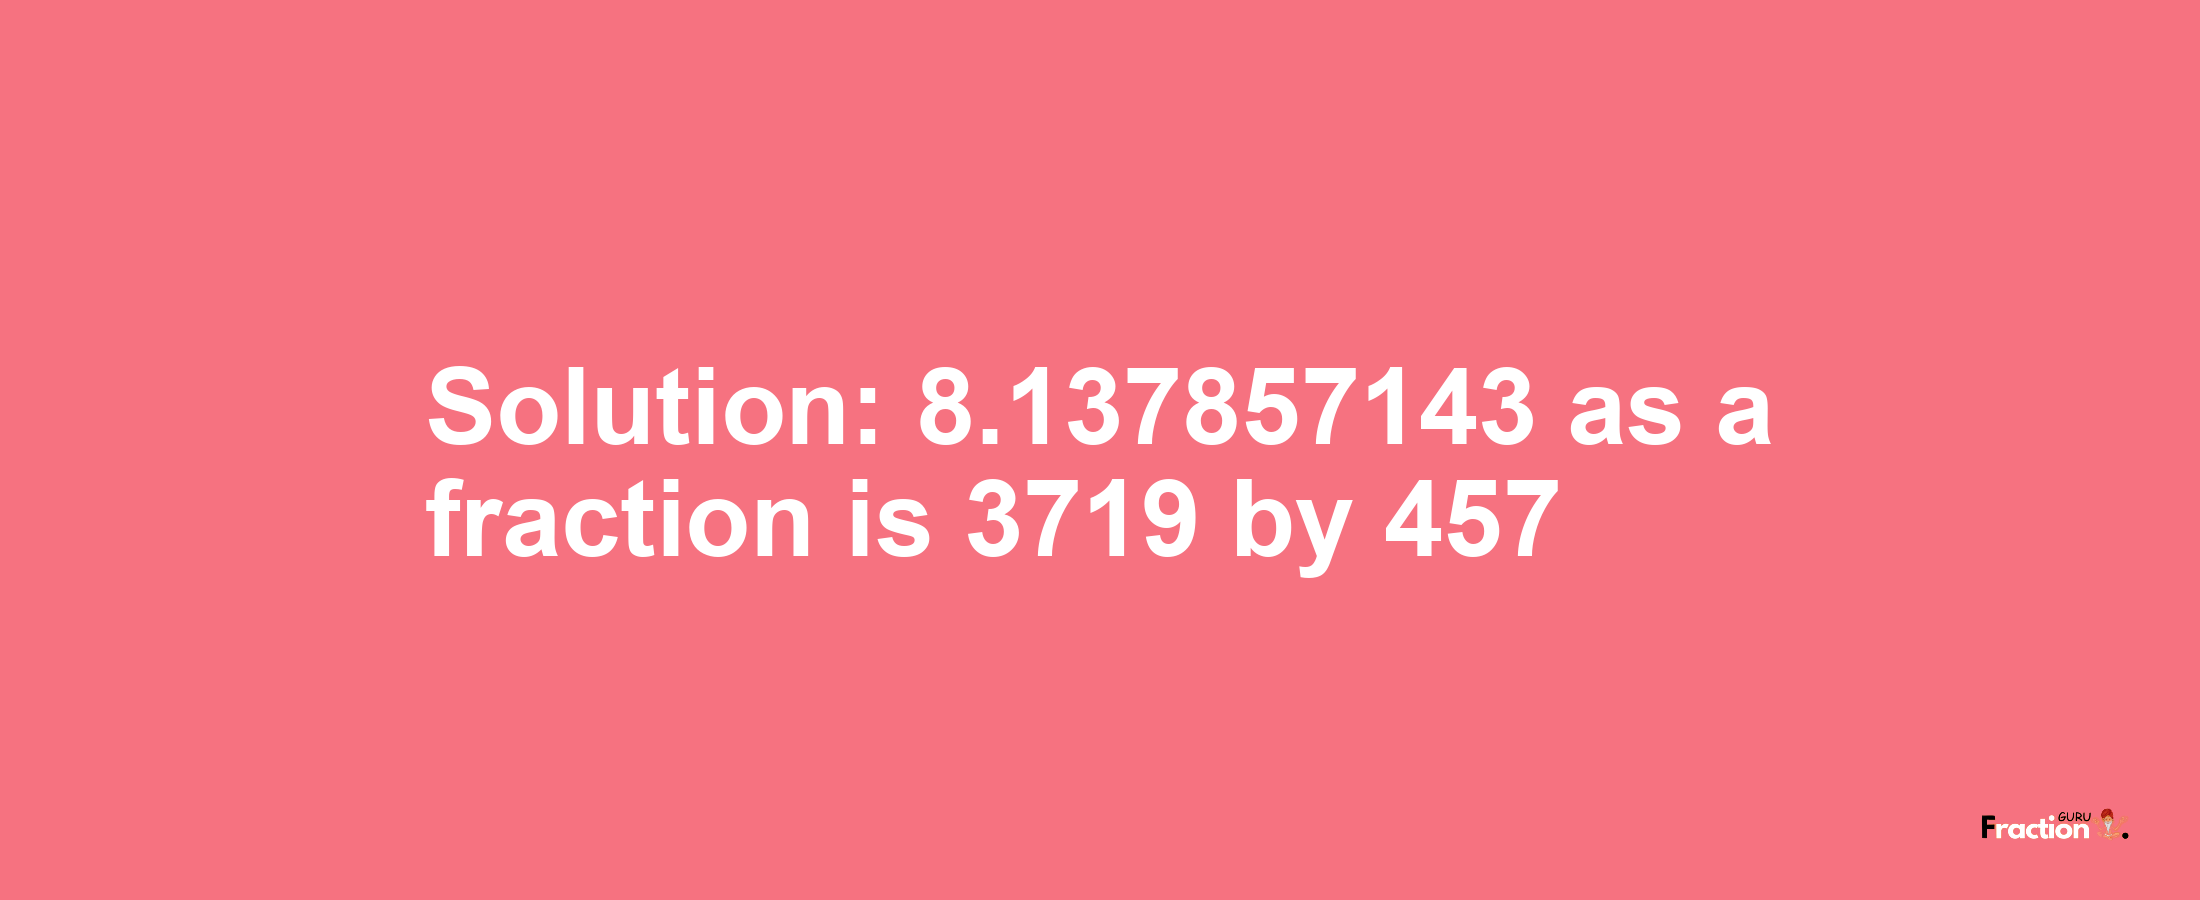 Solution:8.137857143 as a fraction is 3719/457